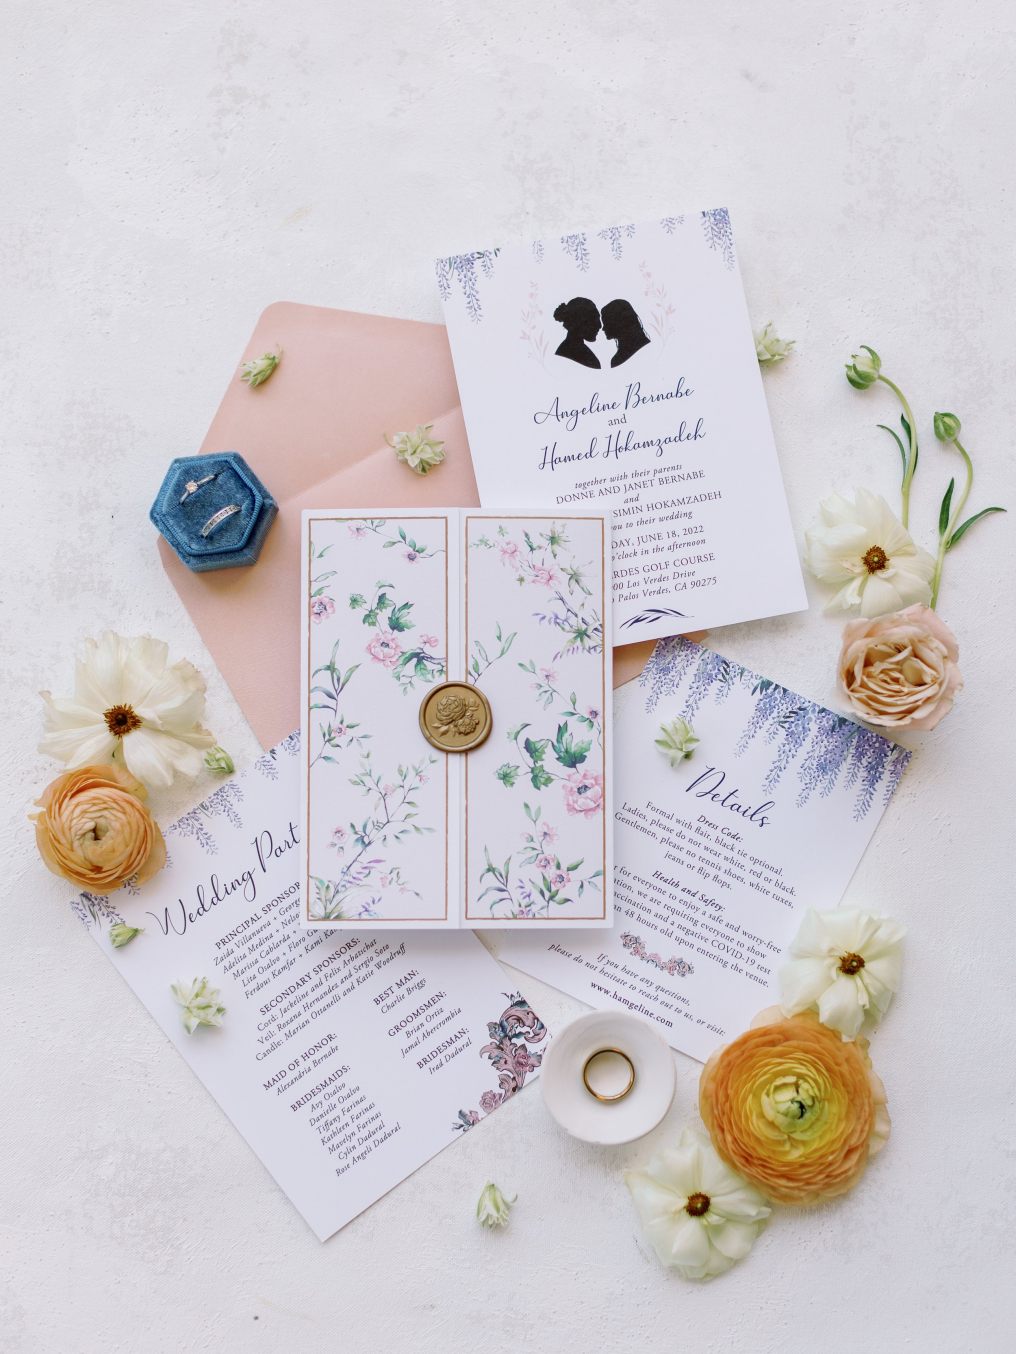 The Blushing Details Planner photo